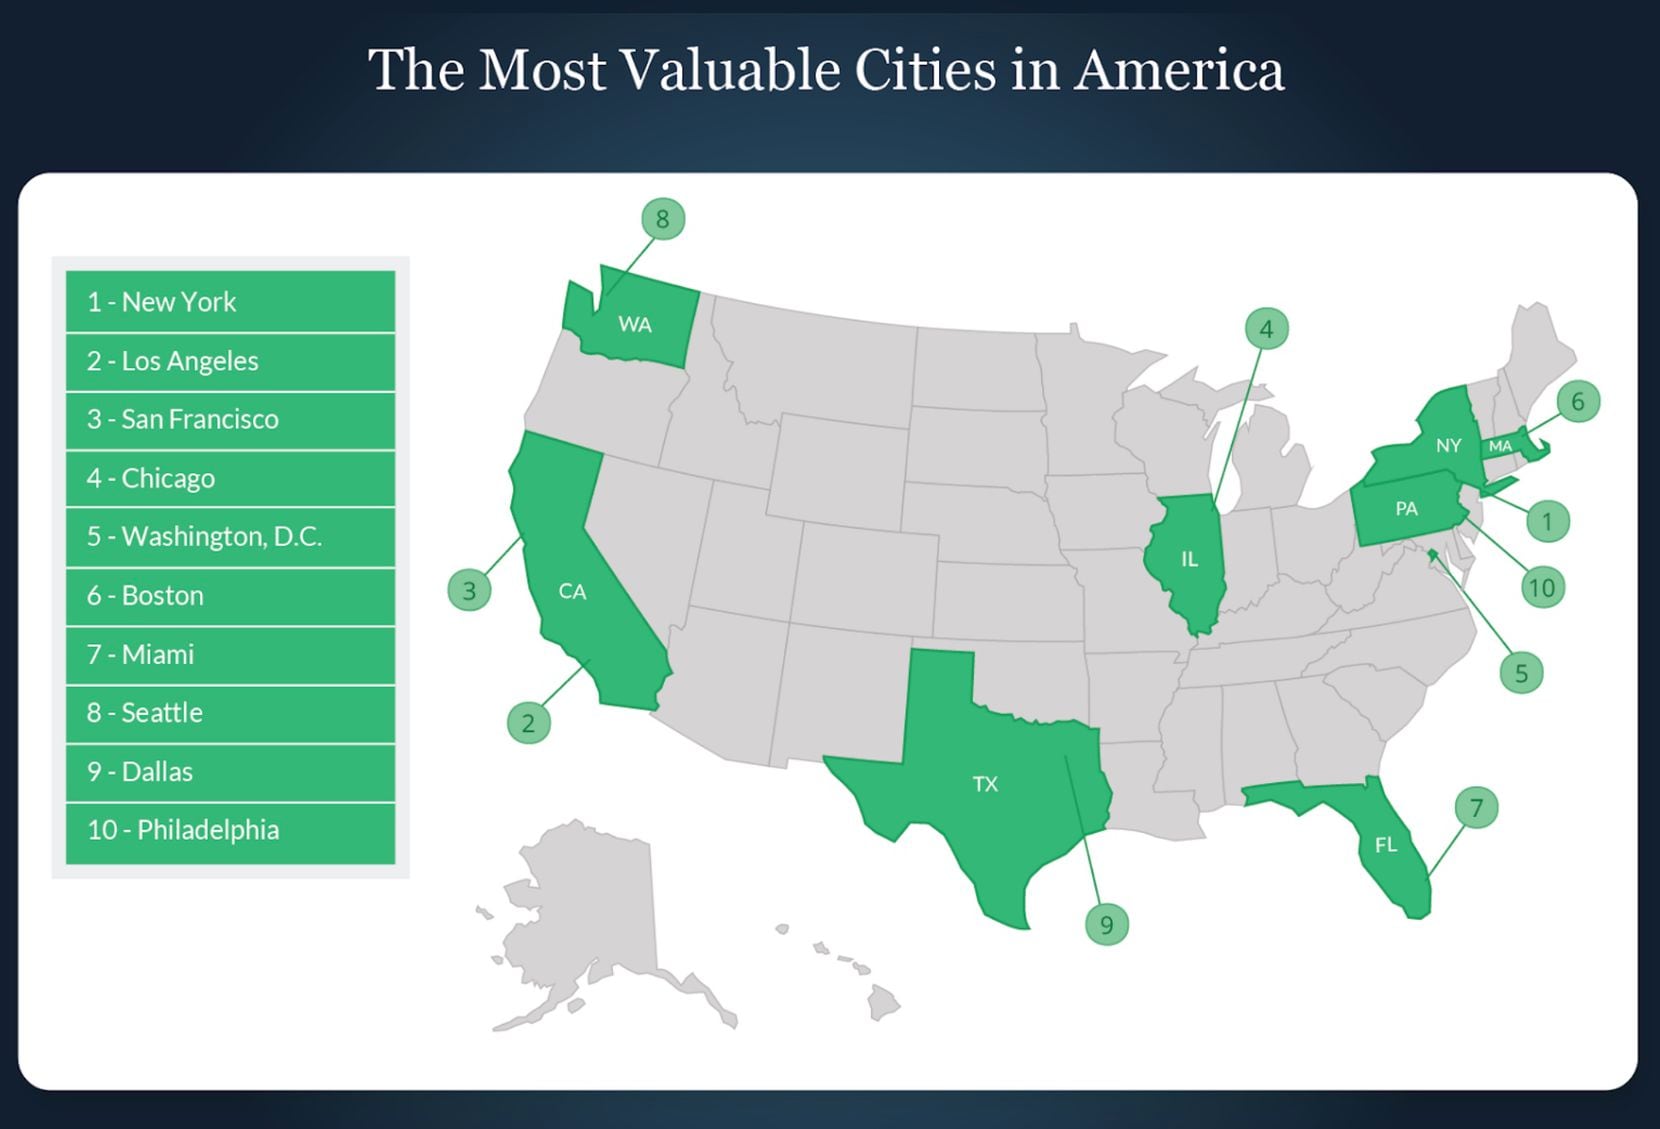 The Dallas area ranks ninth nationally for total residential values.